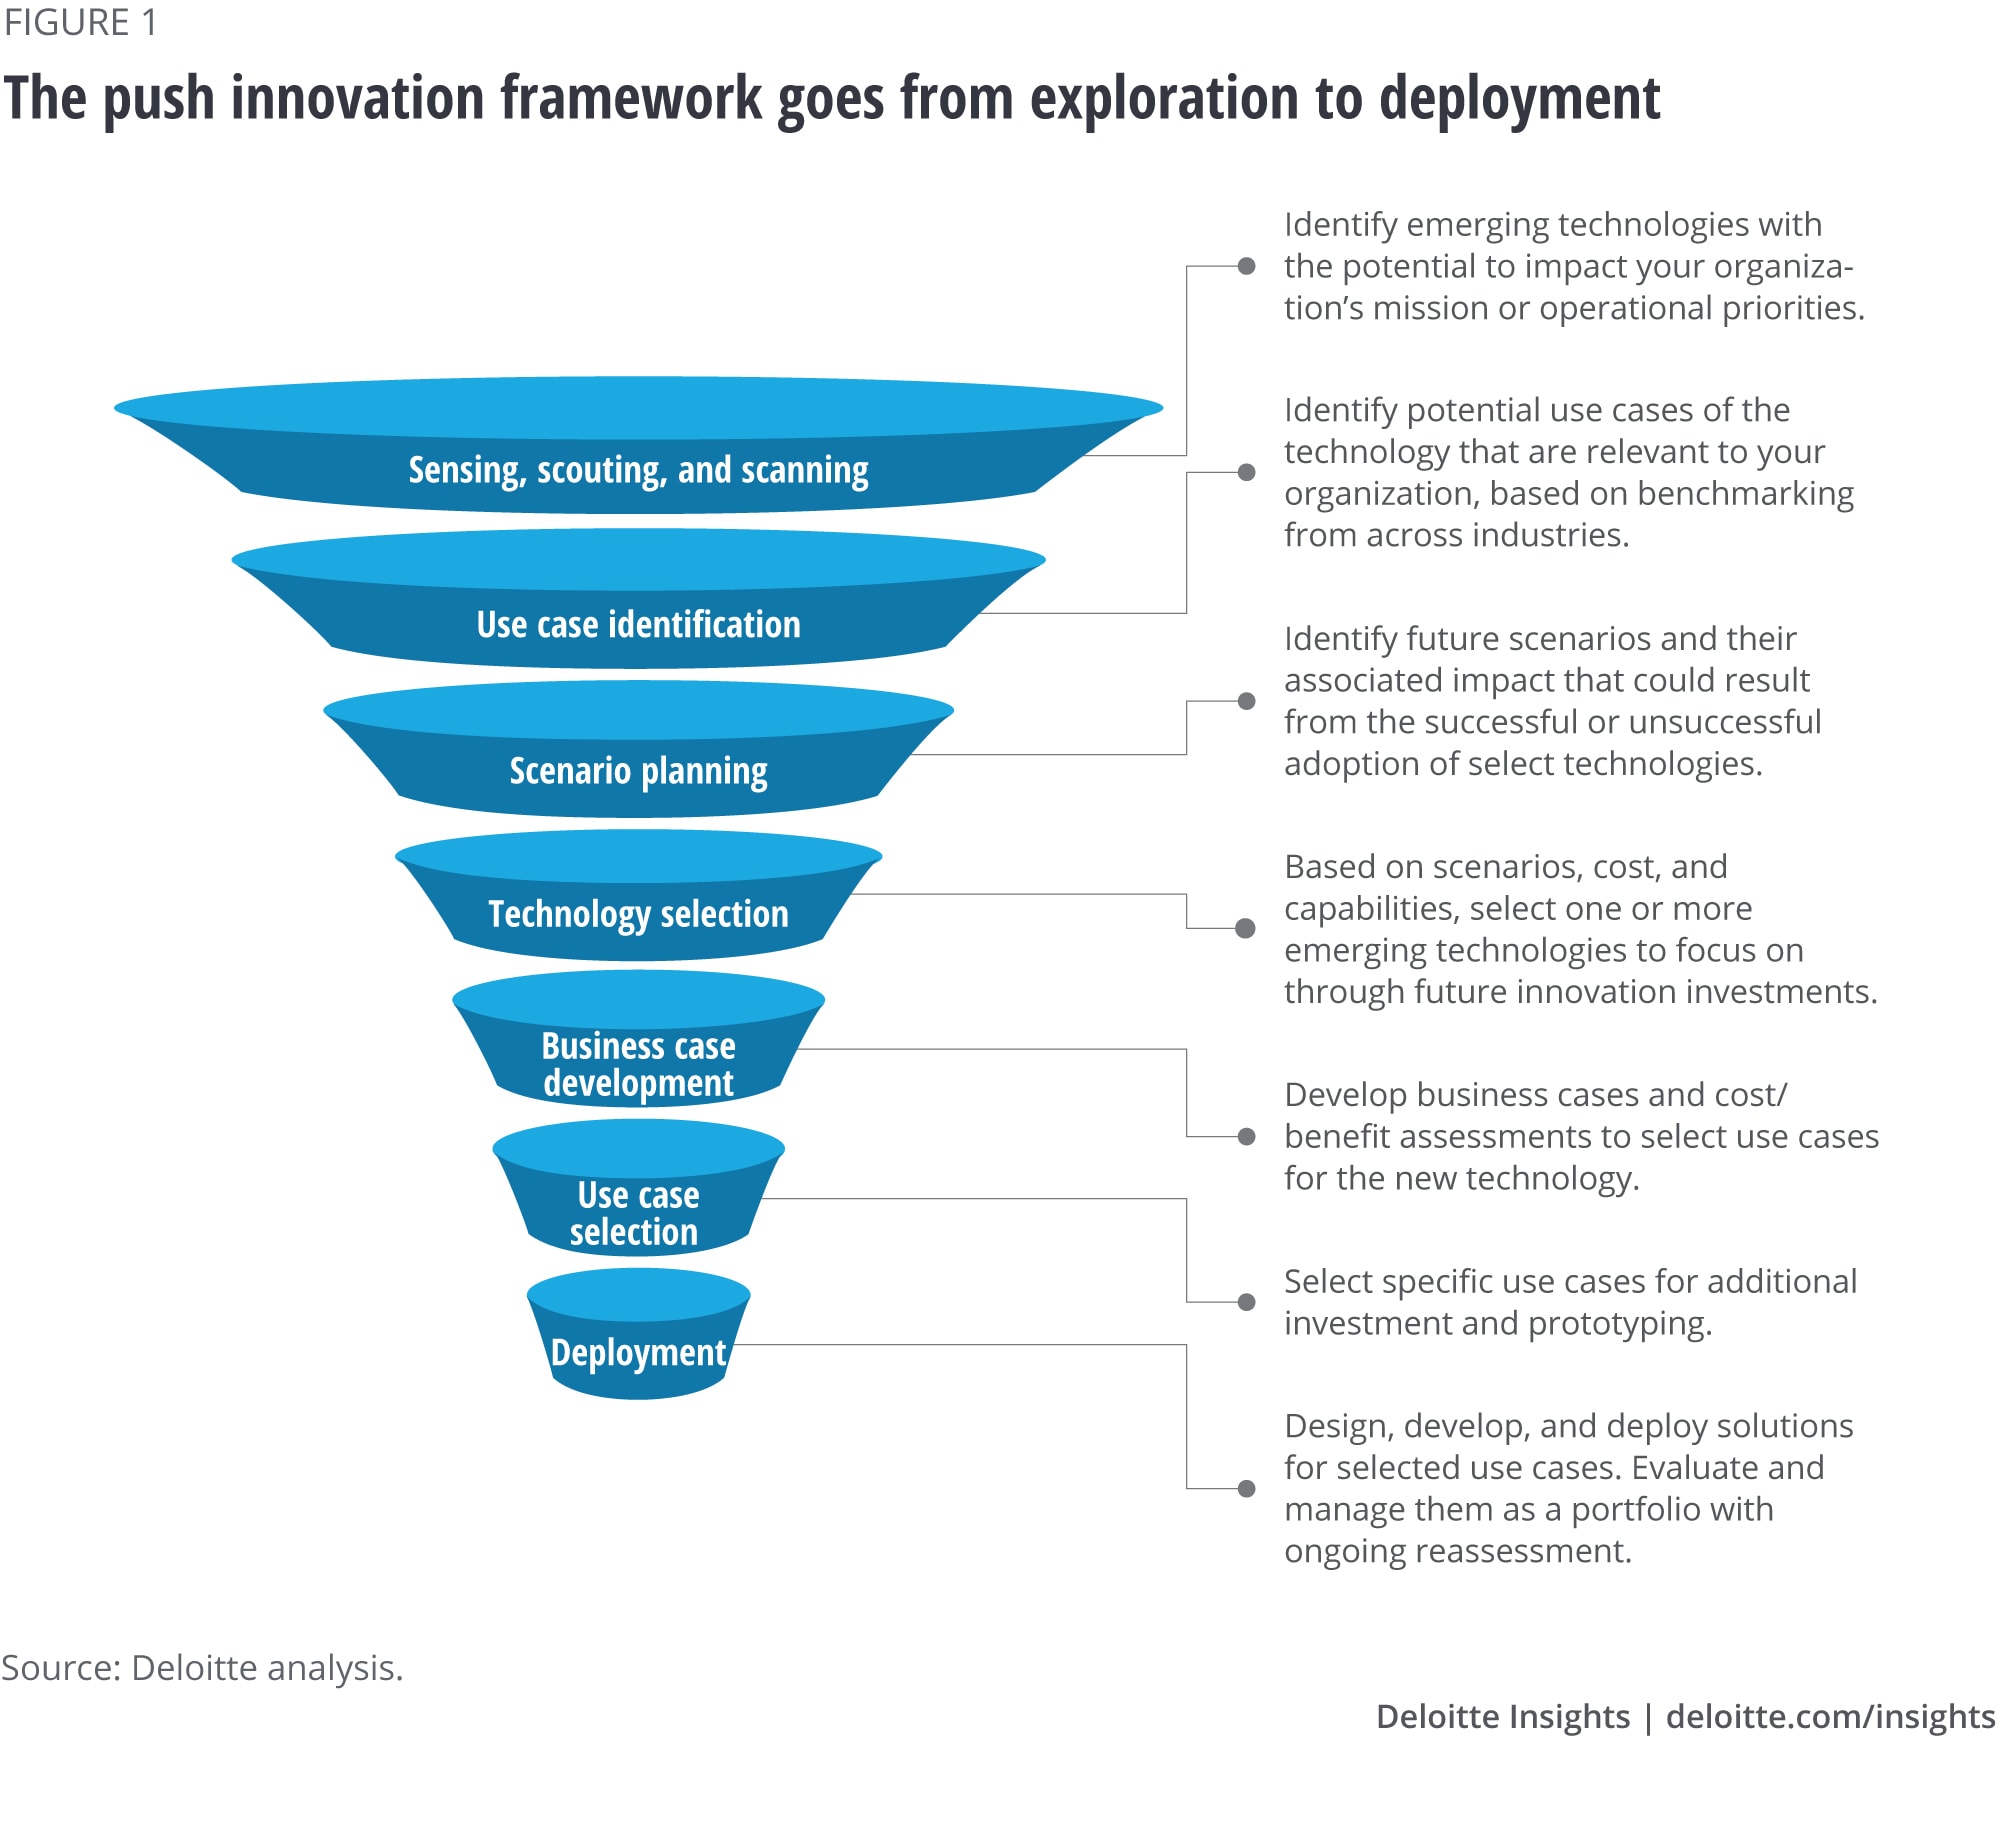 The push innovation framework goes from exploration to deployment